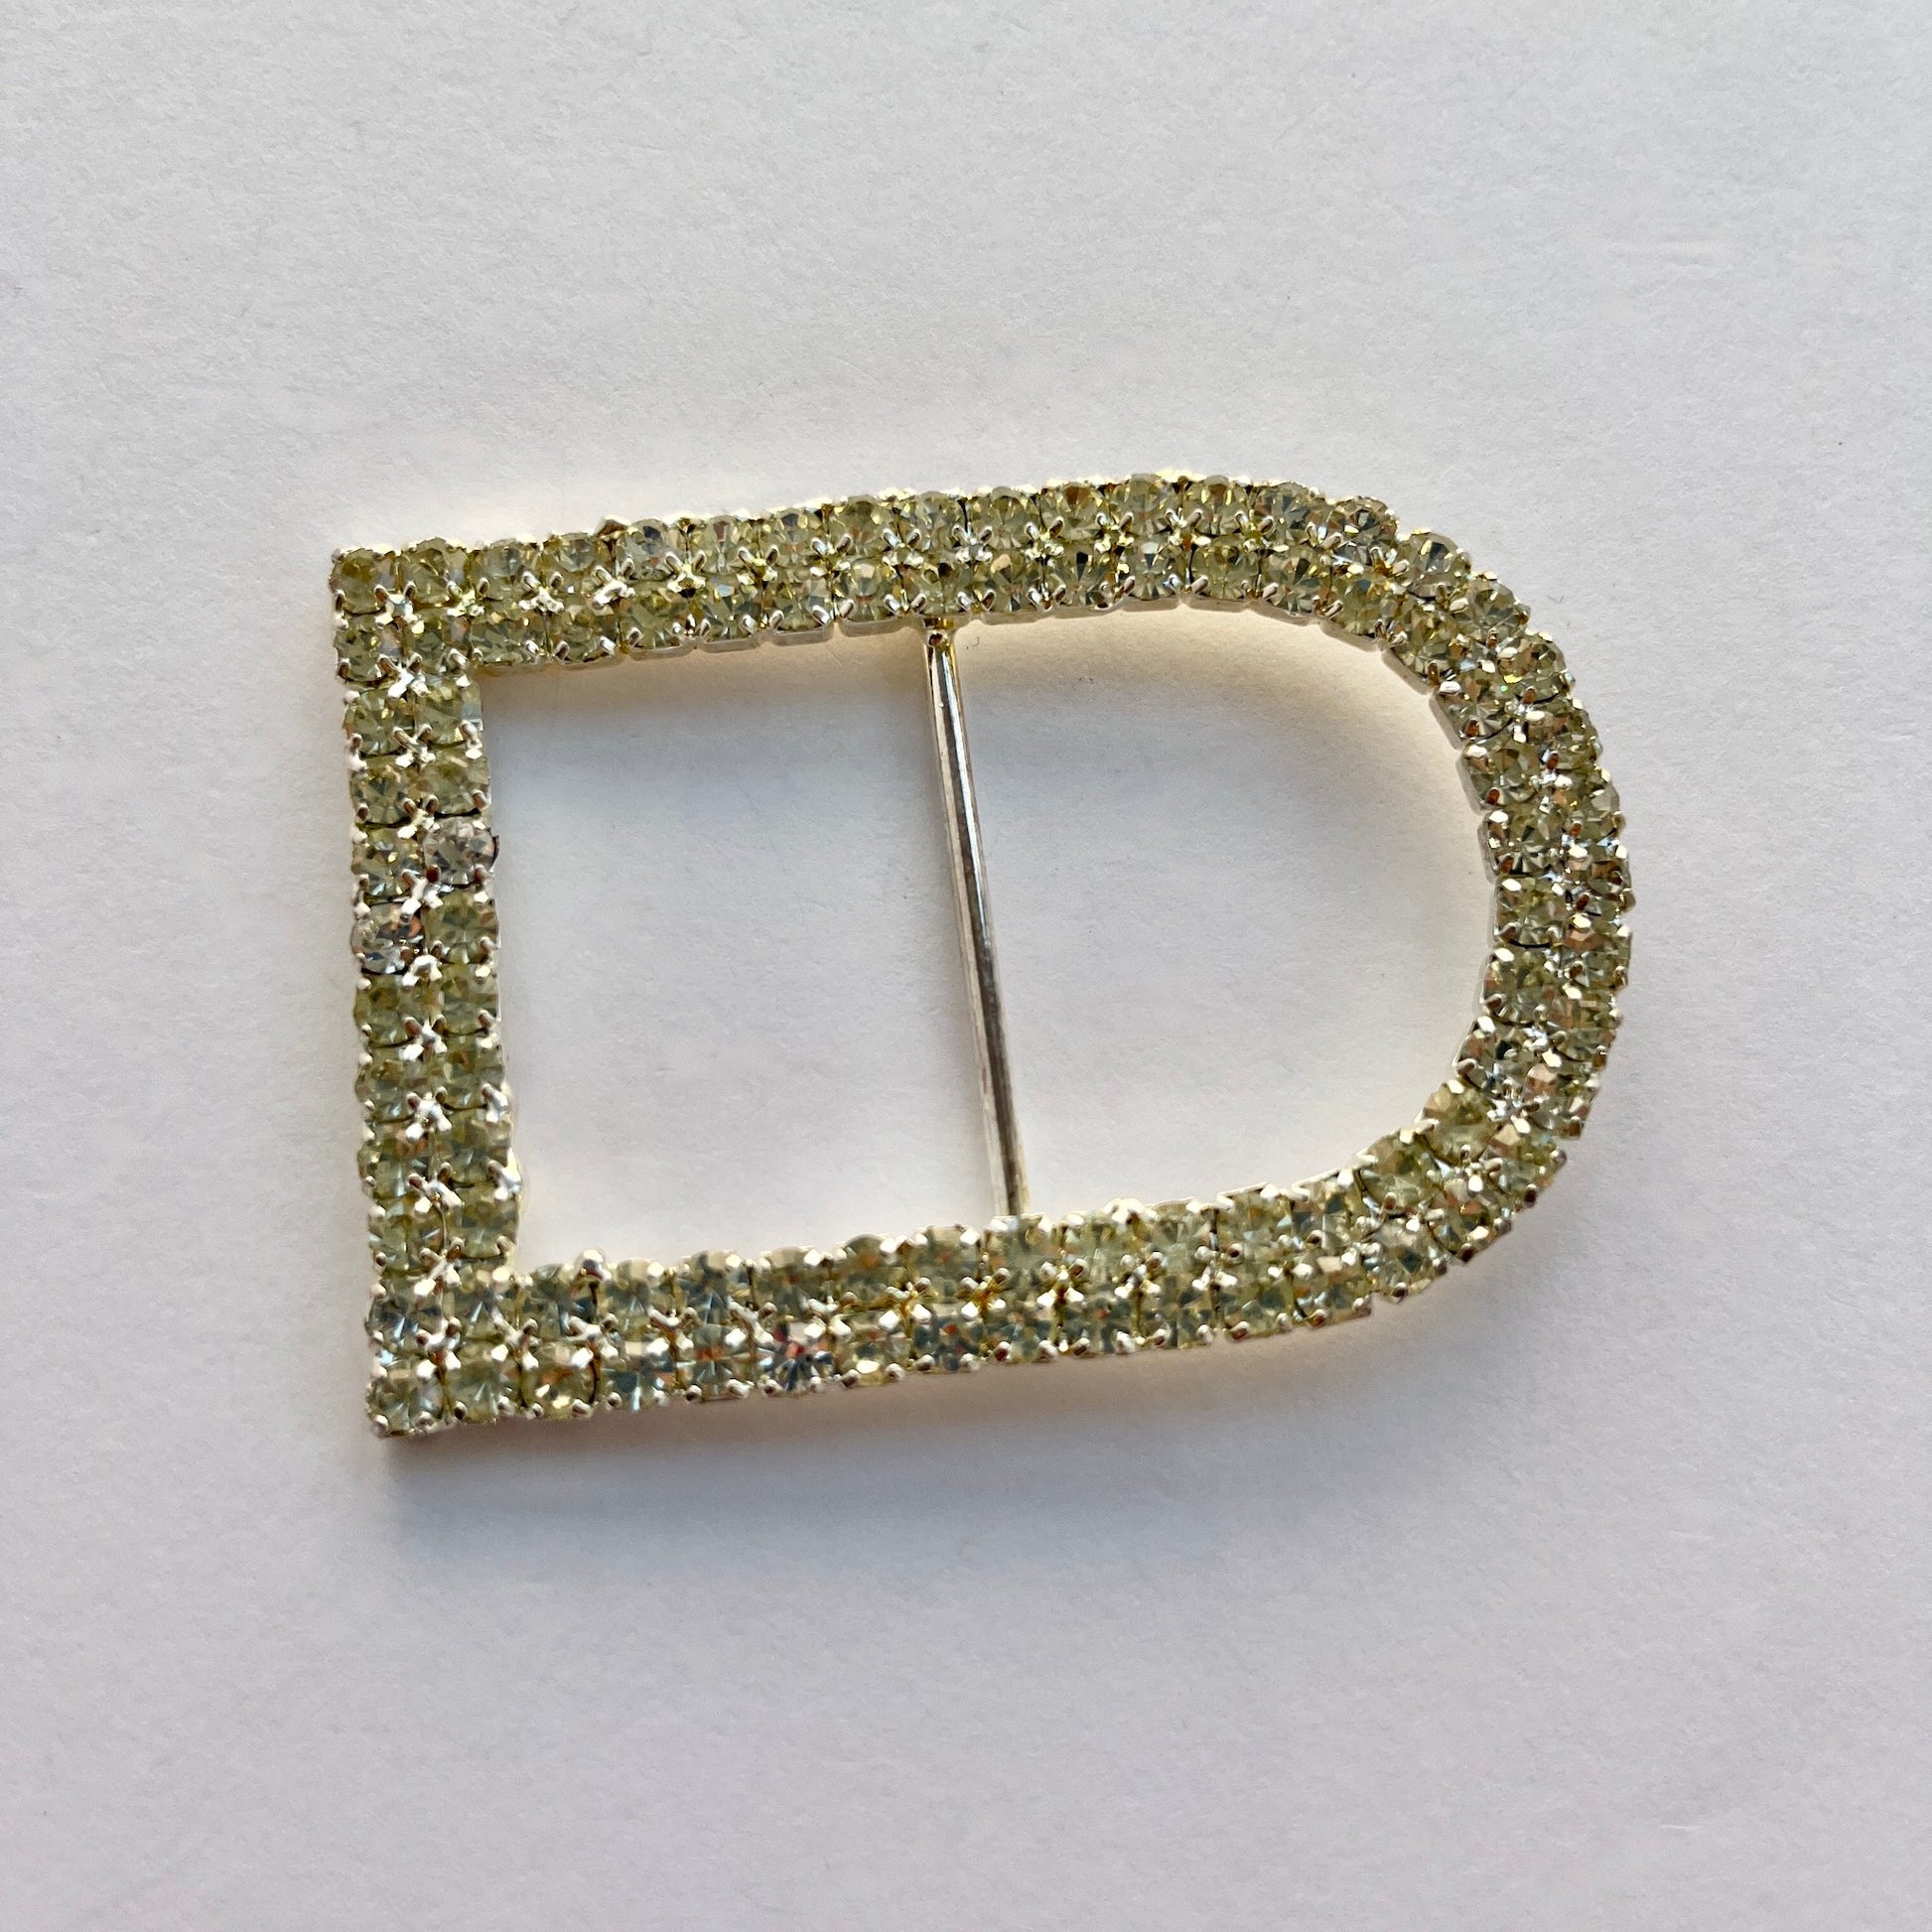 Large D shaped silver rectangle diamante buckle with a double row of rhinestones. Use as a belt buckle, an accent for straps, dressmaking projects or as an embellishment for handbags, wedding invitations, wedding favours, napkin rings and arts and craft projects. 